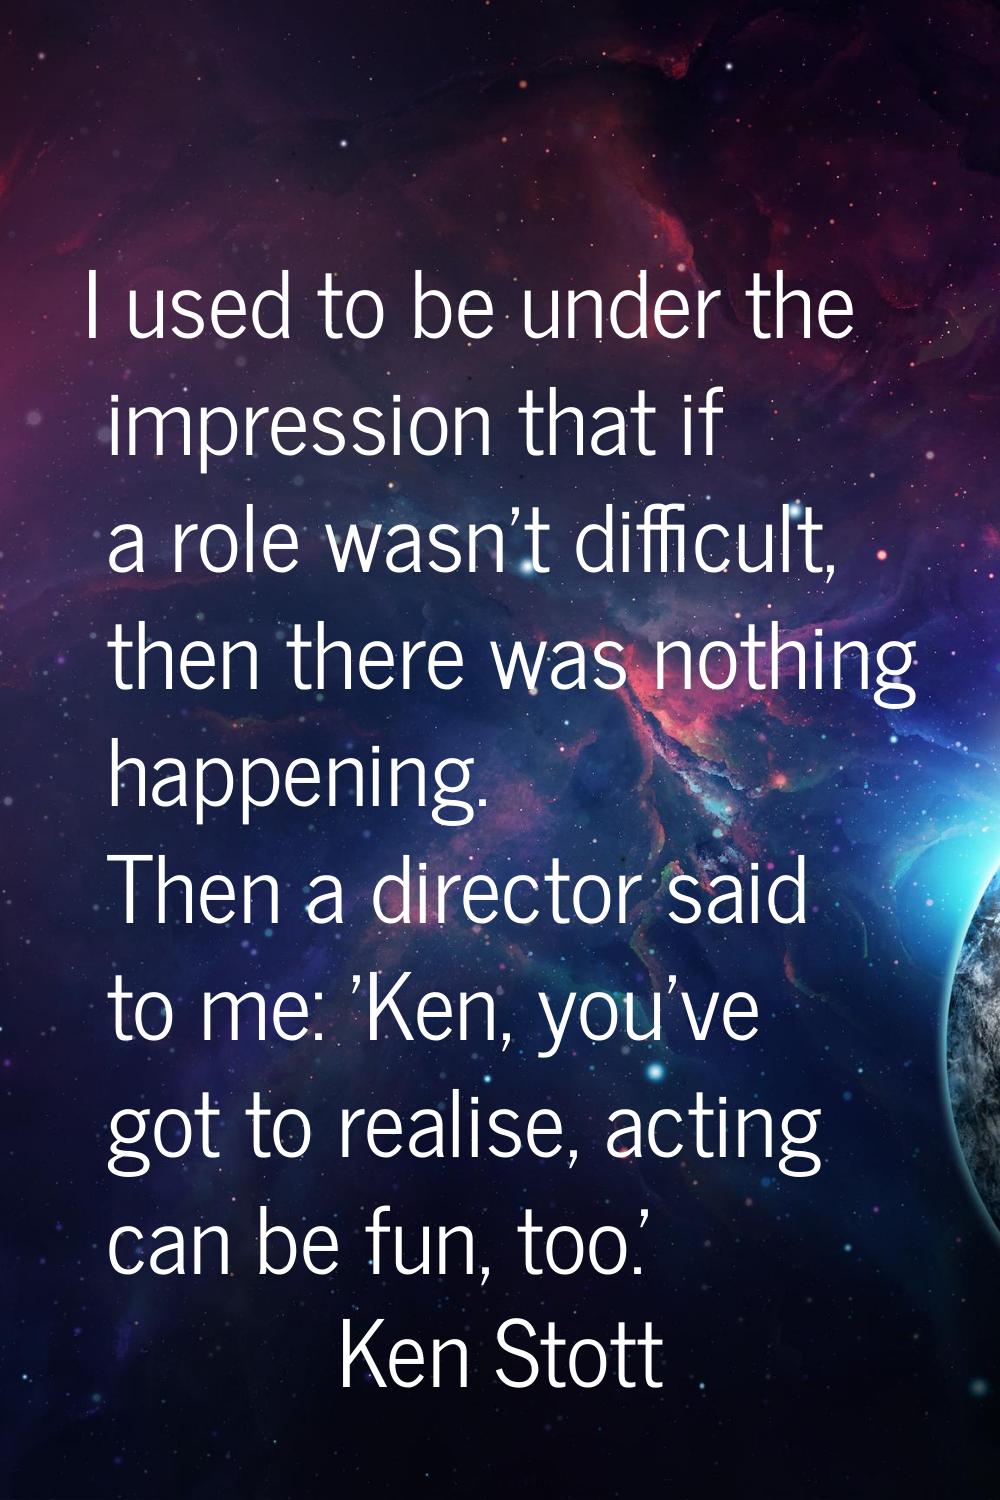 I used to be under the impression that if a role wasn't difficult, then there was nothing happening